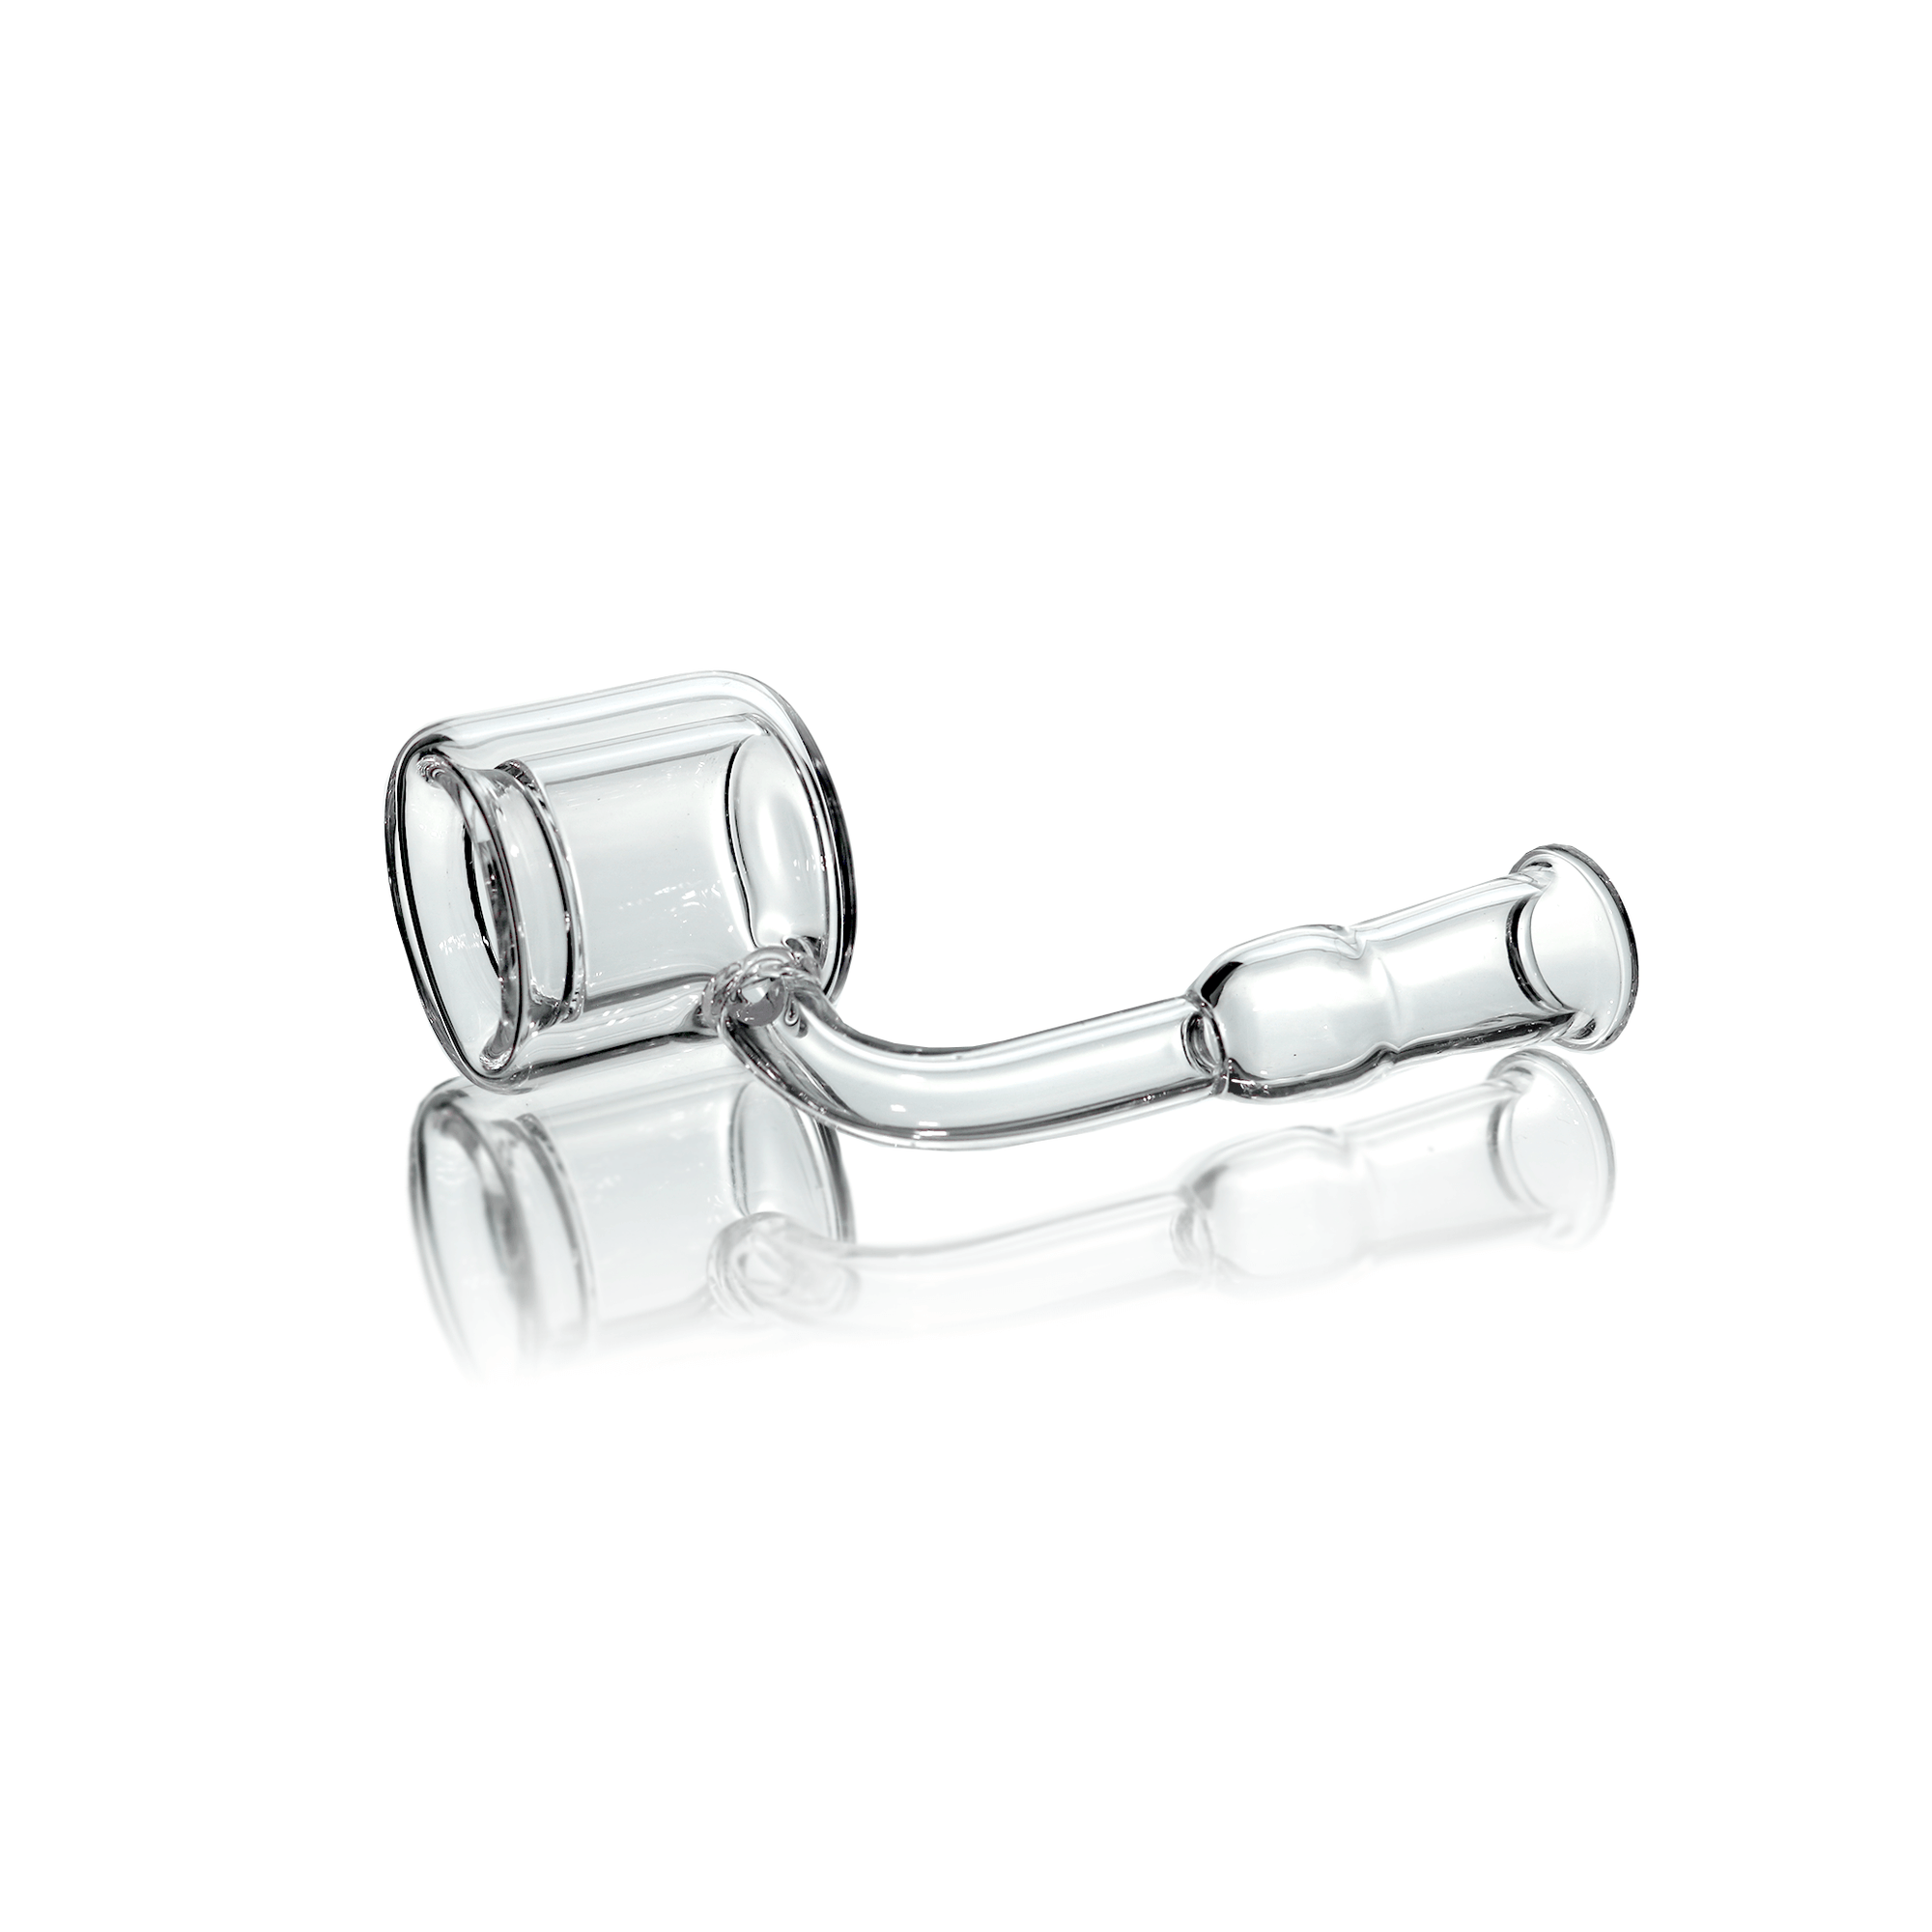 Quartz Double Wall Thermal Banger (Torch) | 10mm Female | the dabbing specialists